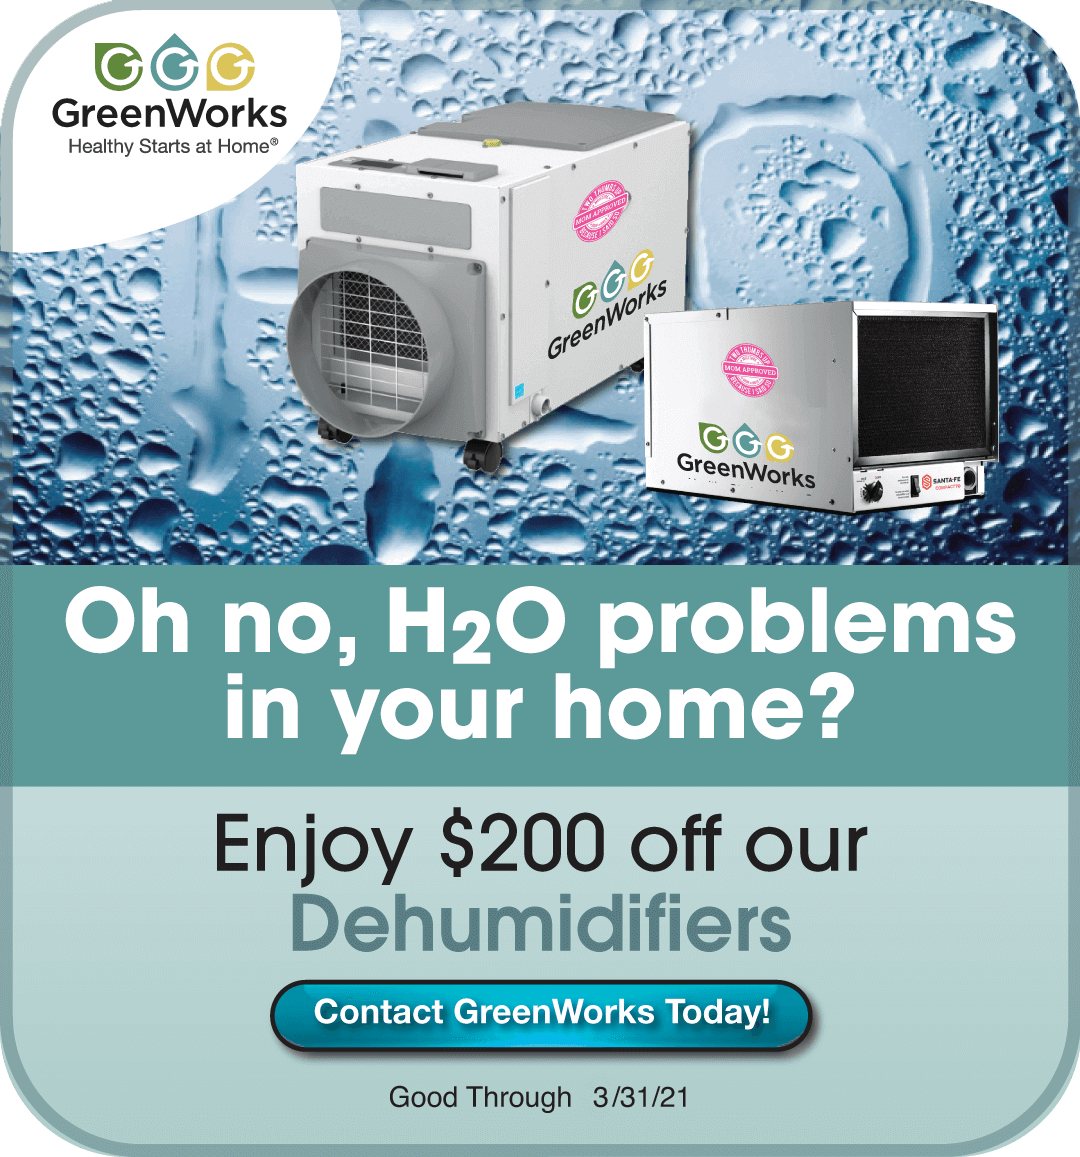 Enjoy $200 off our dehumidifiers